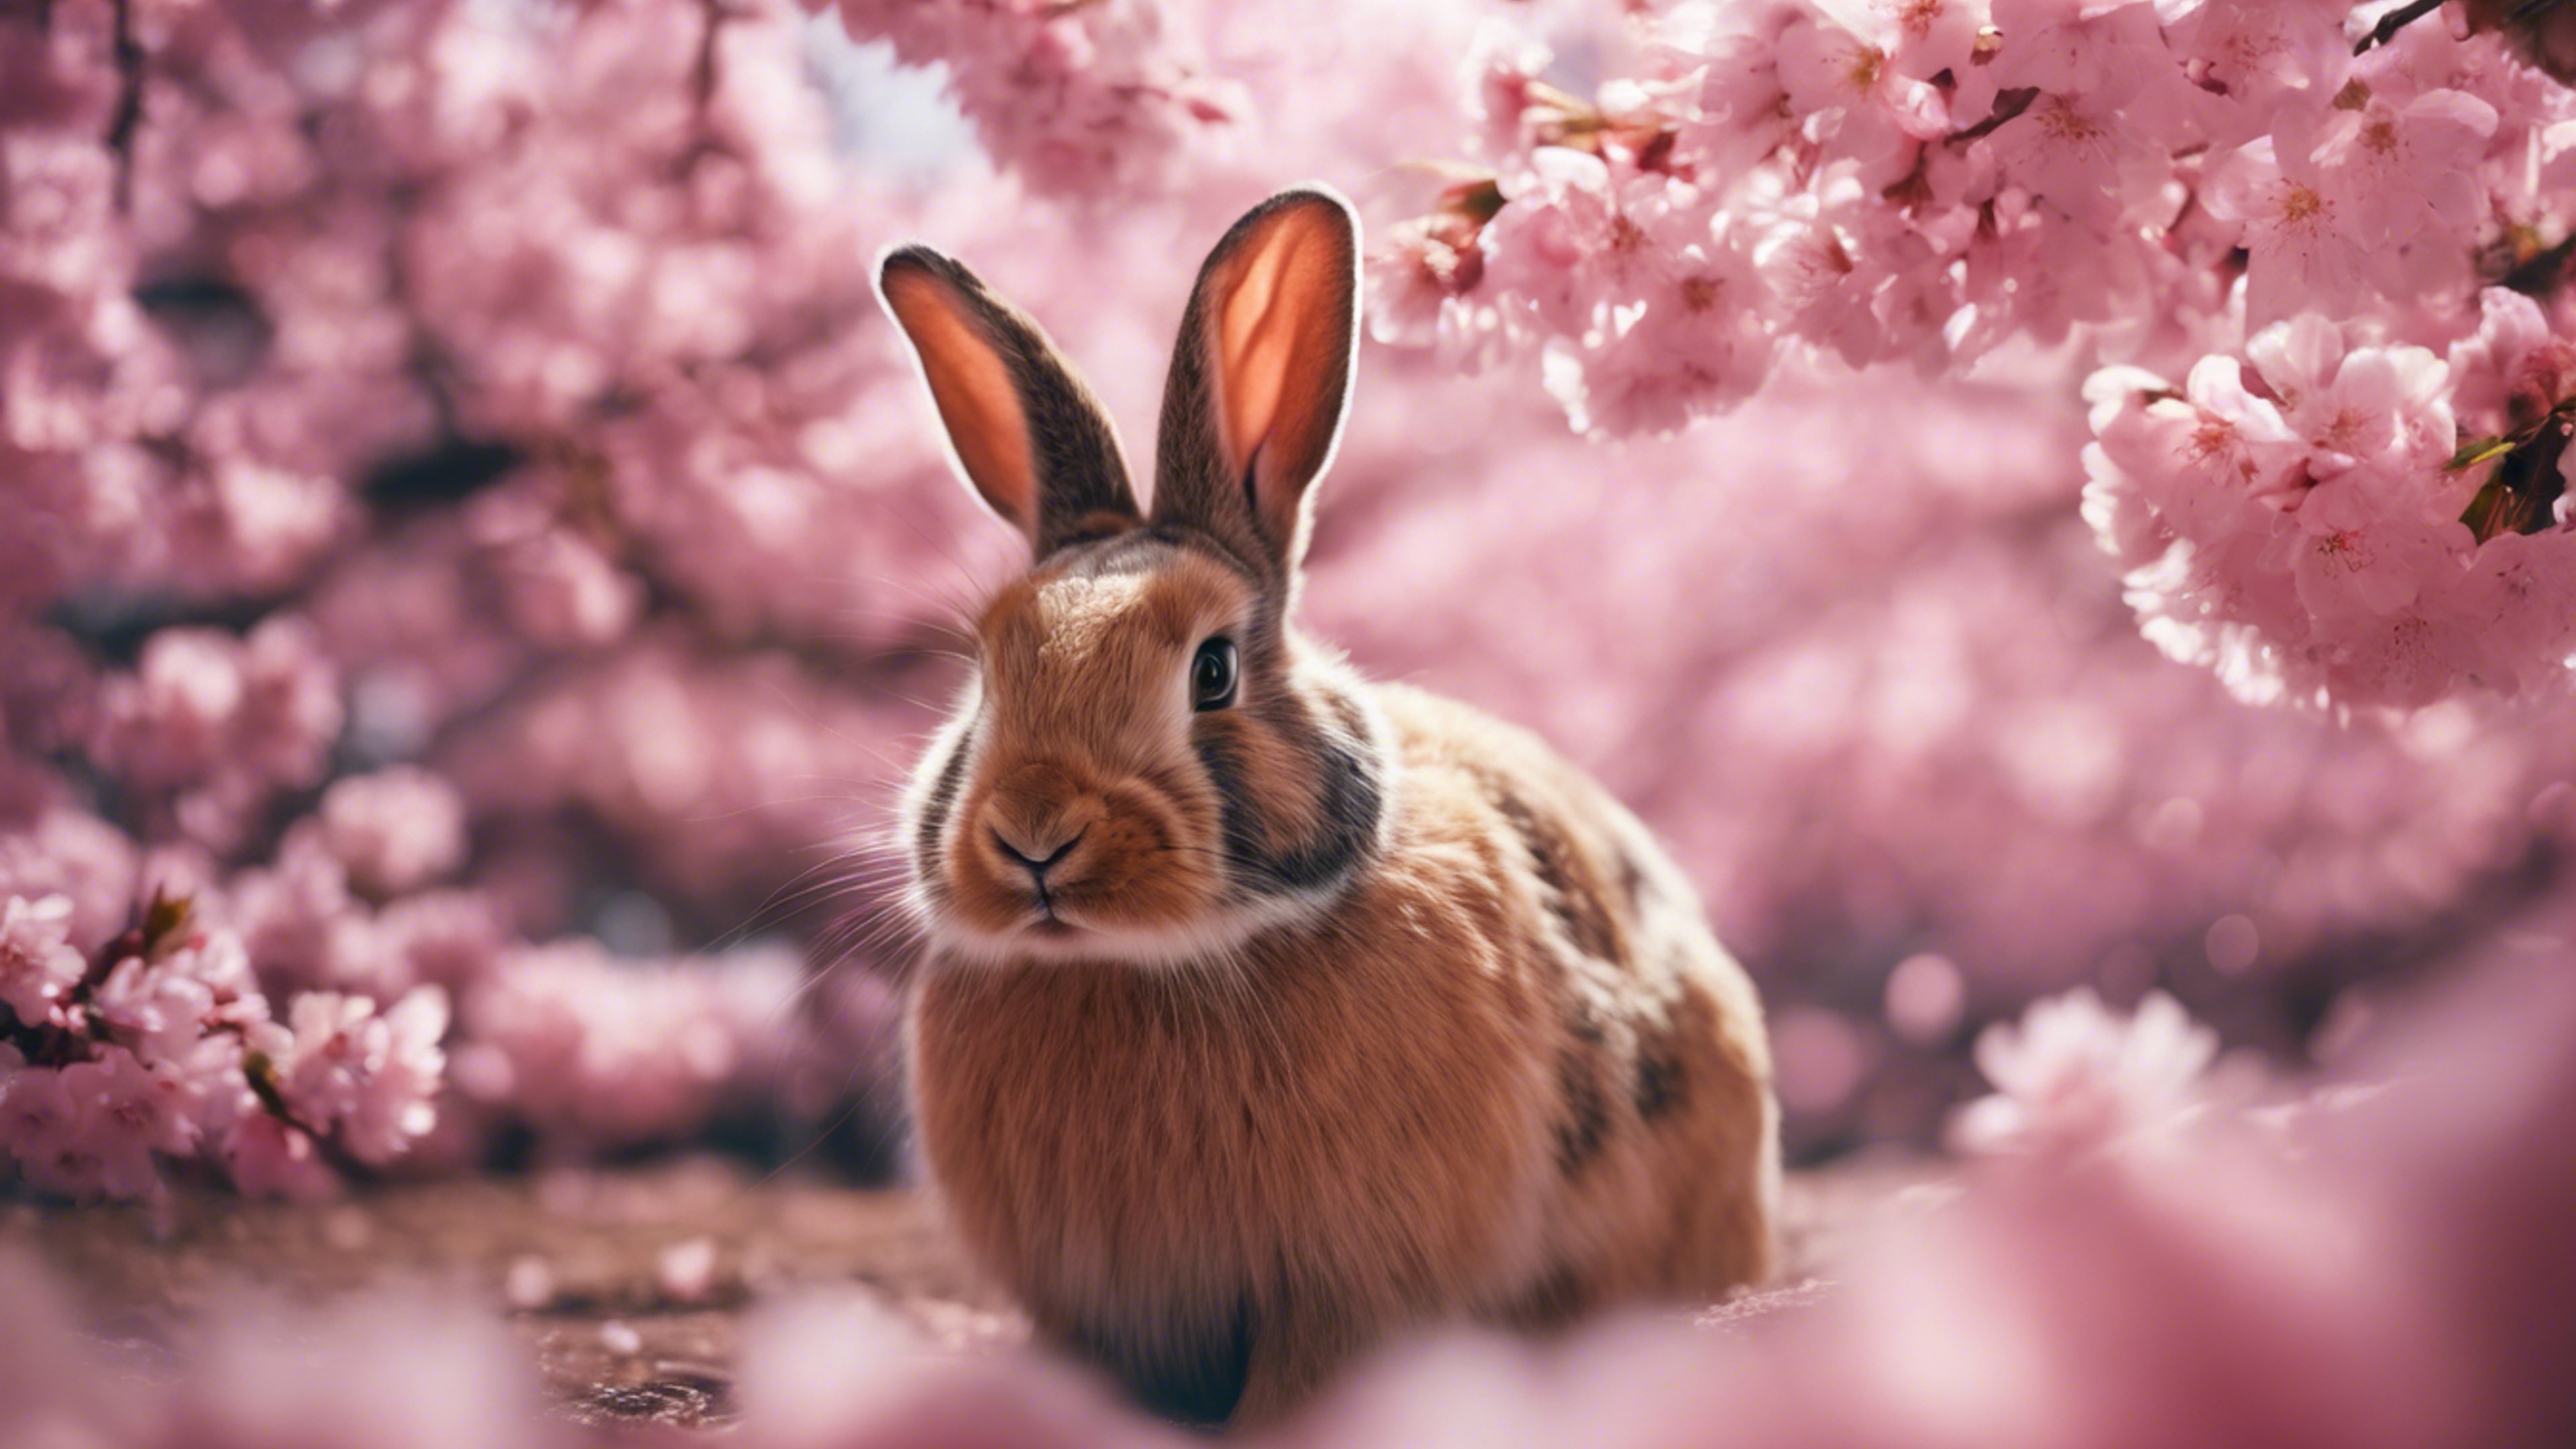 A rabbit amid a cherry blossom festival, surrounded by vibrant pink petals. Wallpaper[82443ce6430044309a8d]